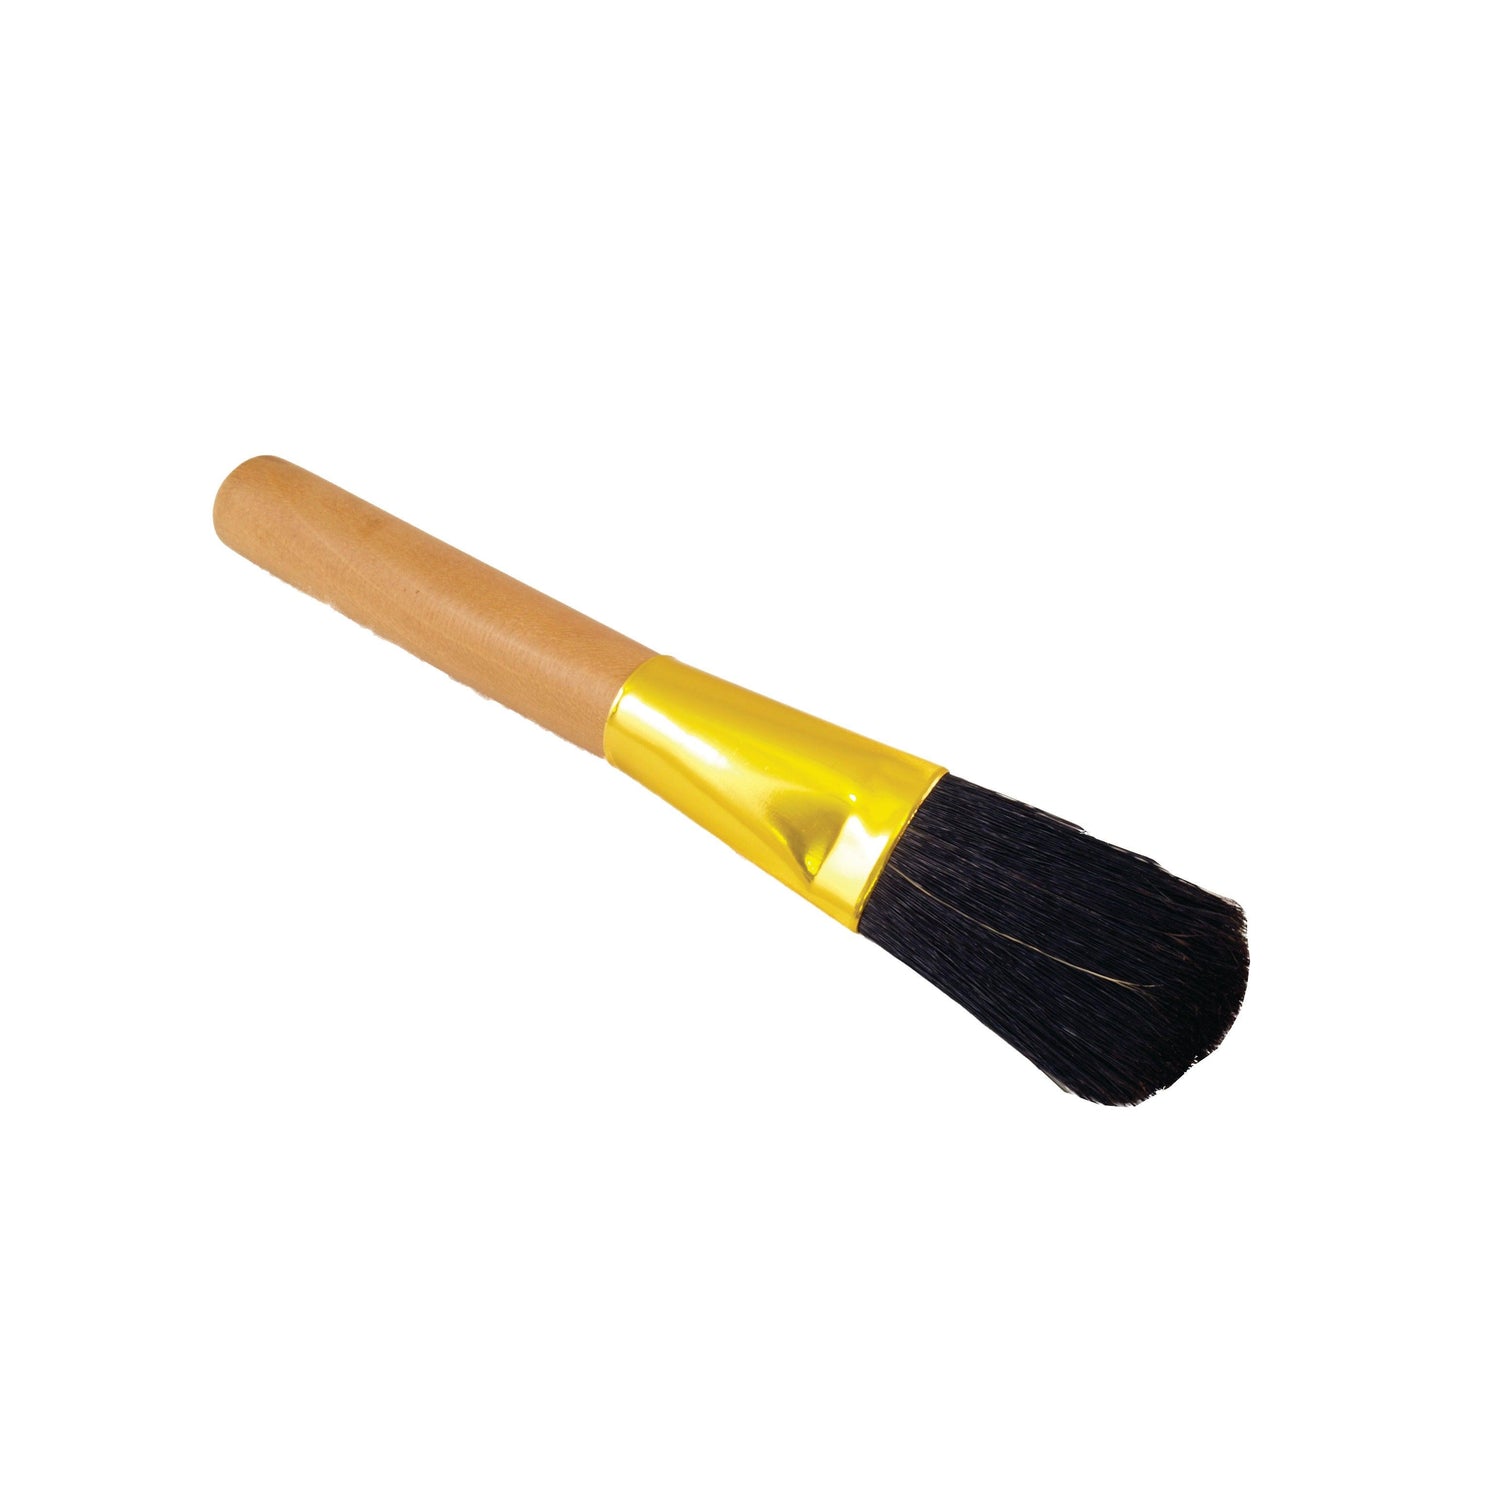 Premium Coffee Grounds Cleaning Brush Wooden Handle